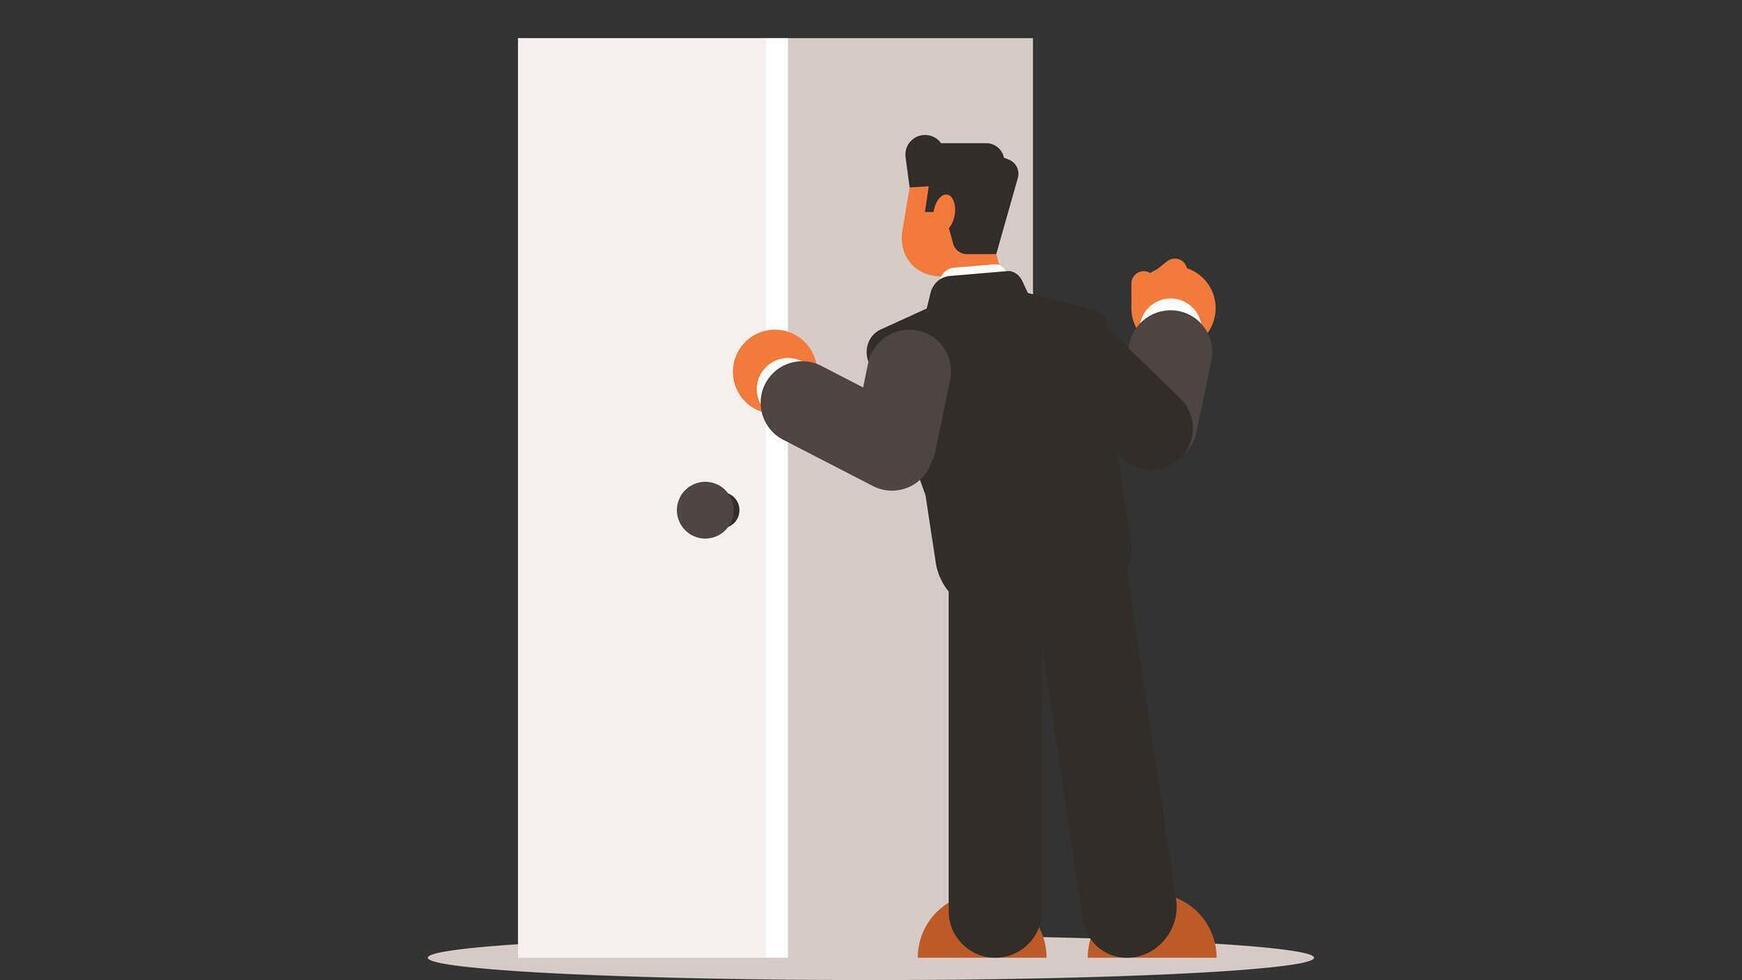 a person opens a door in the dark illustration vector